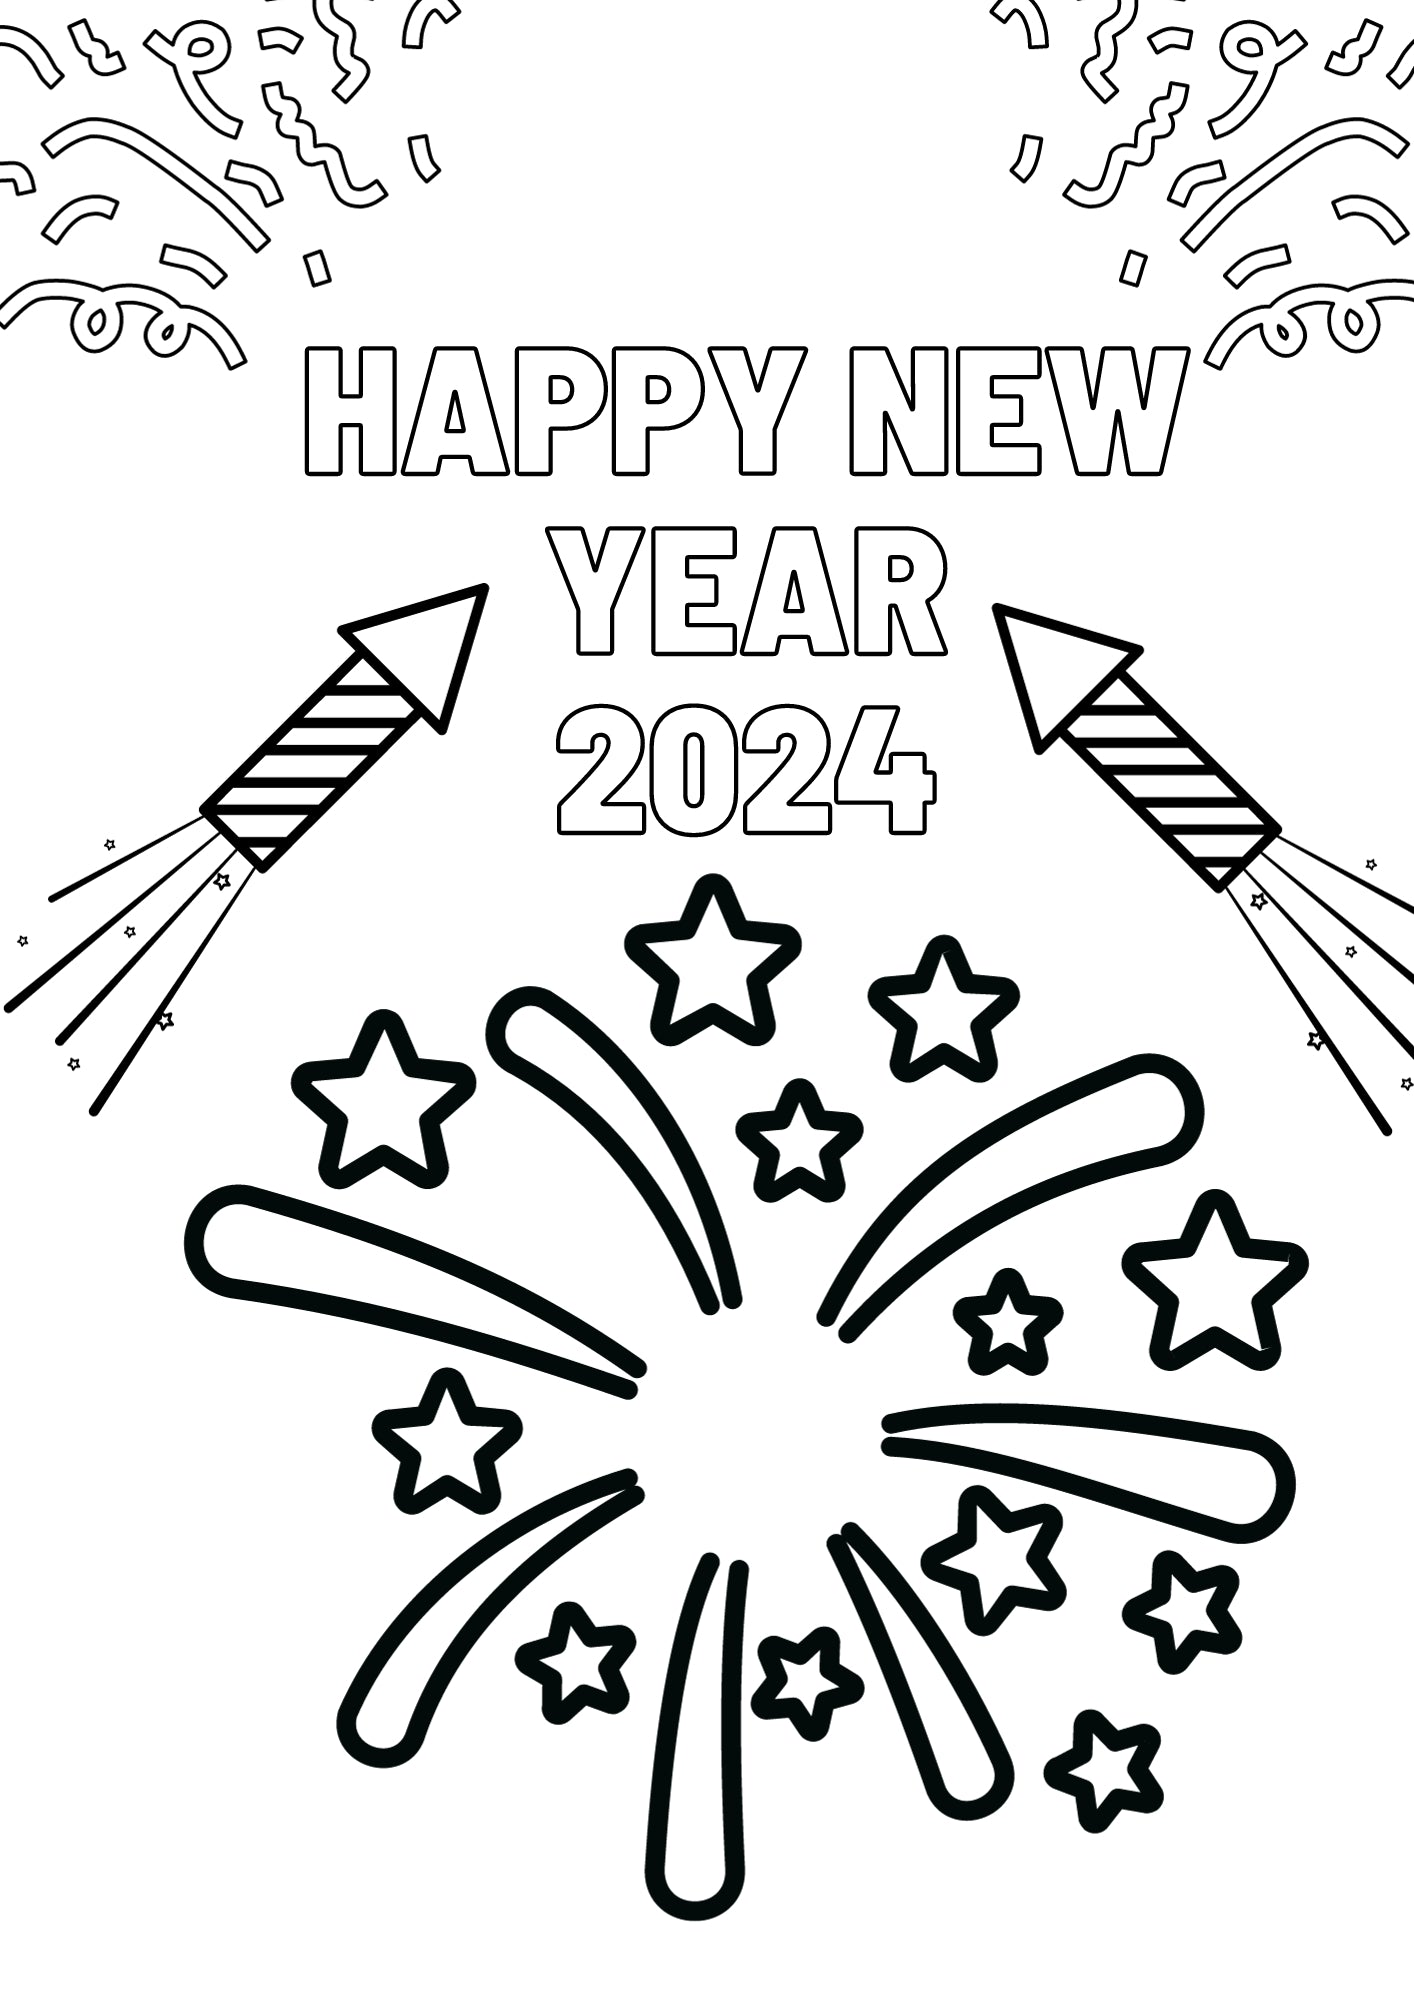 Happy New Year 2024, colouring firework page Digital Download Resource